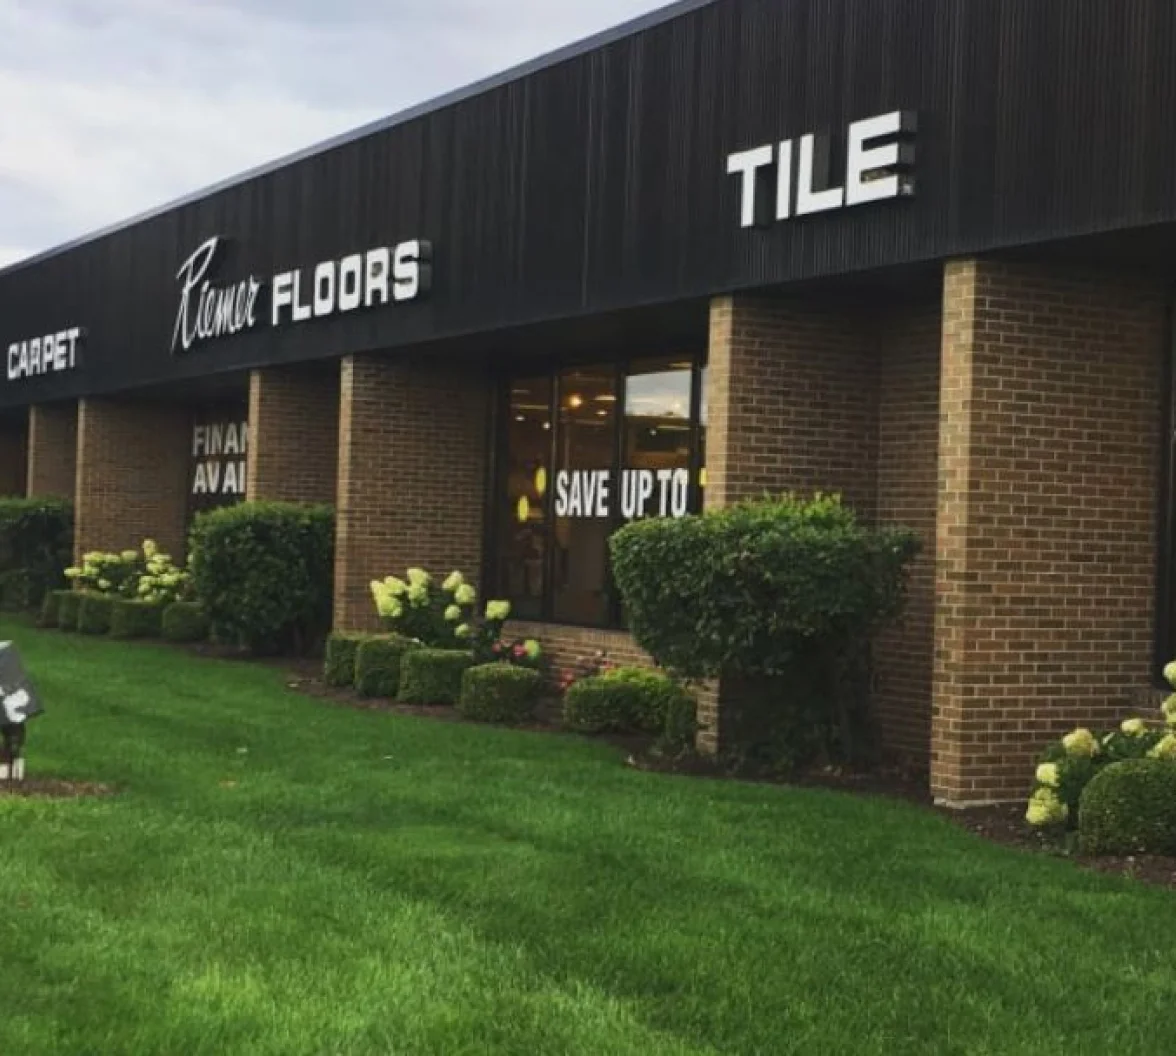 Get to know the team at Riemer Floors in Bloomfield Hills, MI